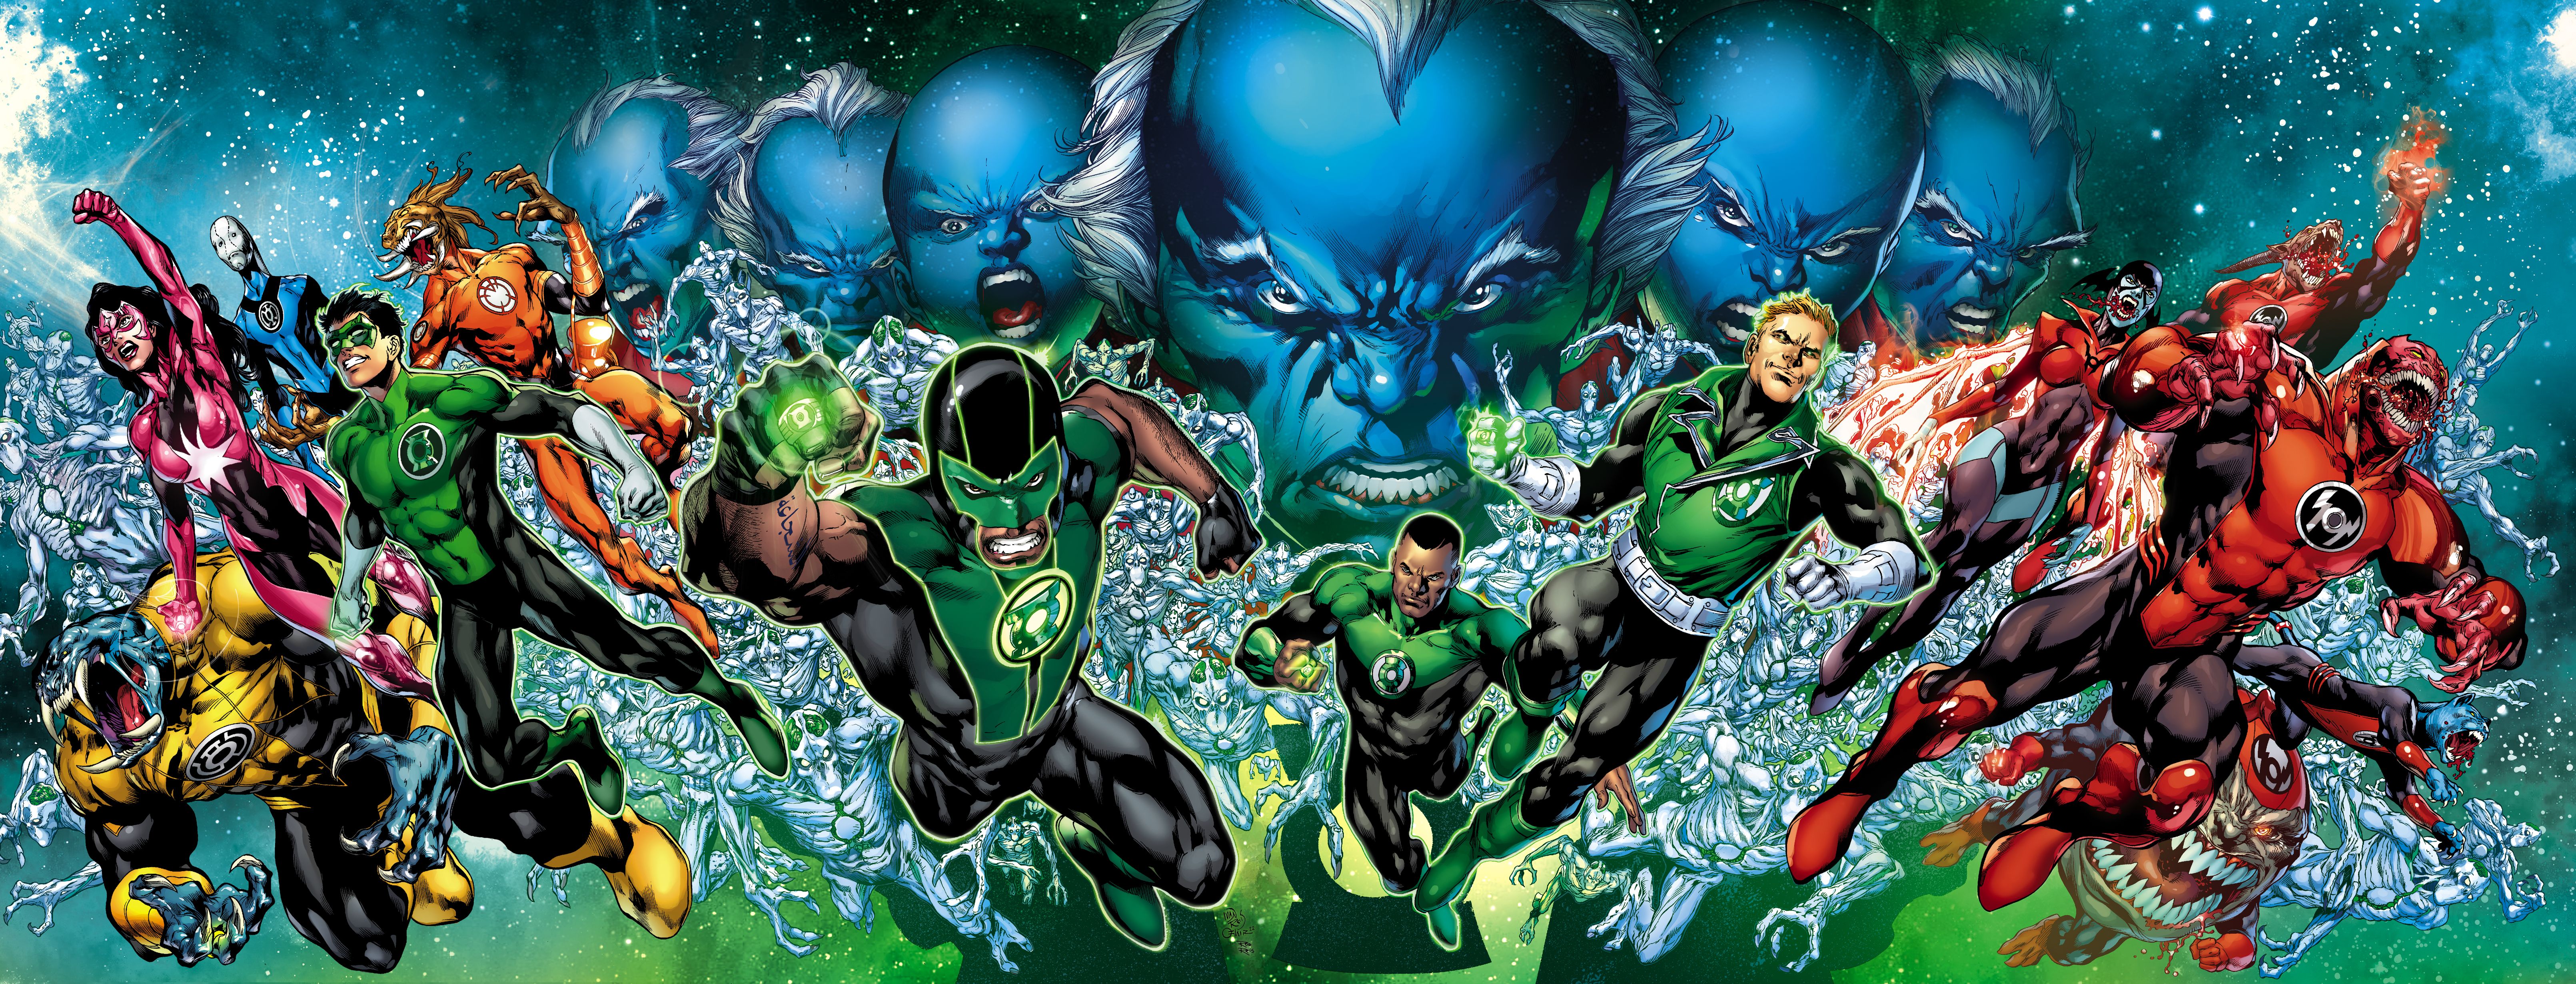 Off My Mind: How the Third Army Will Change the Green Lantern